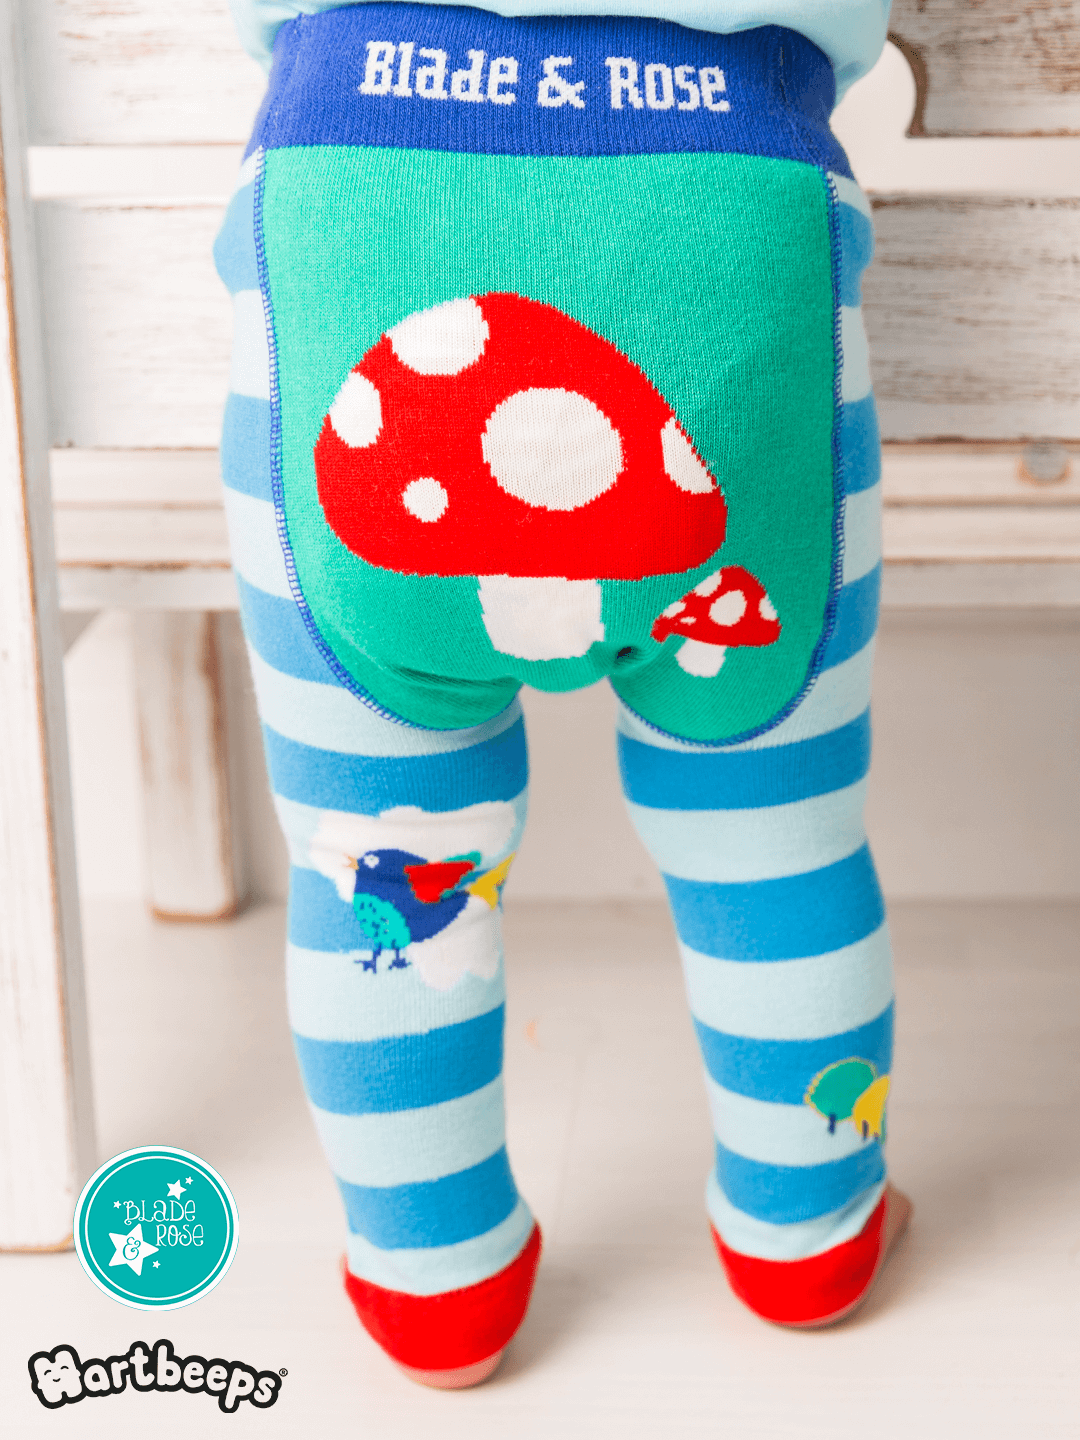 Blade & Rose Buzzy Bee Leggings — The Northern Line